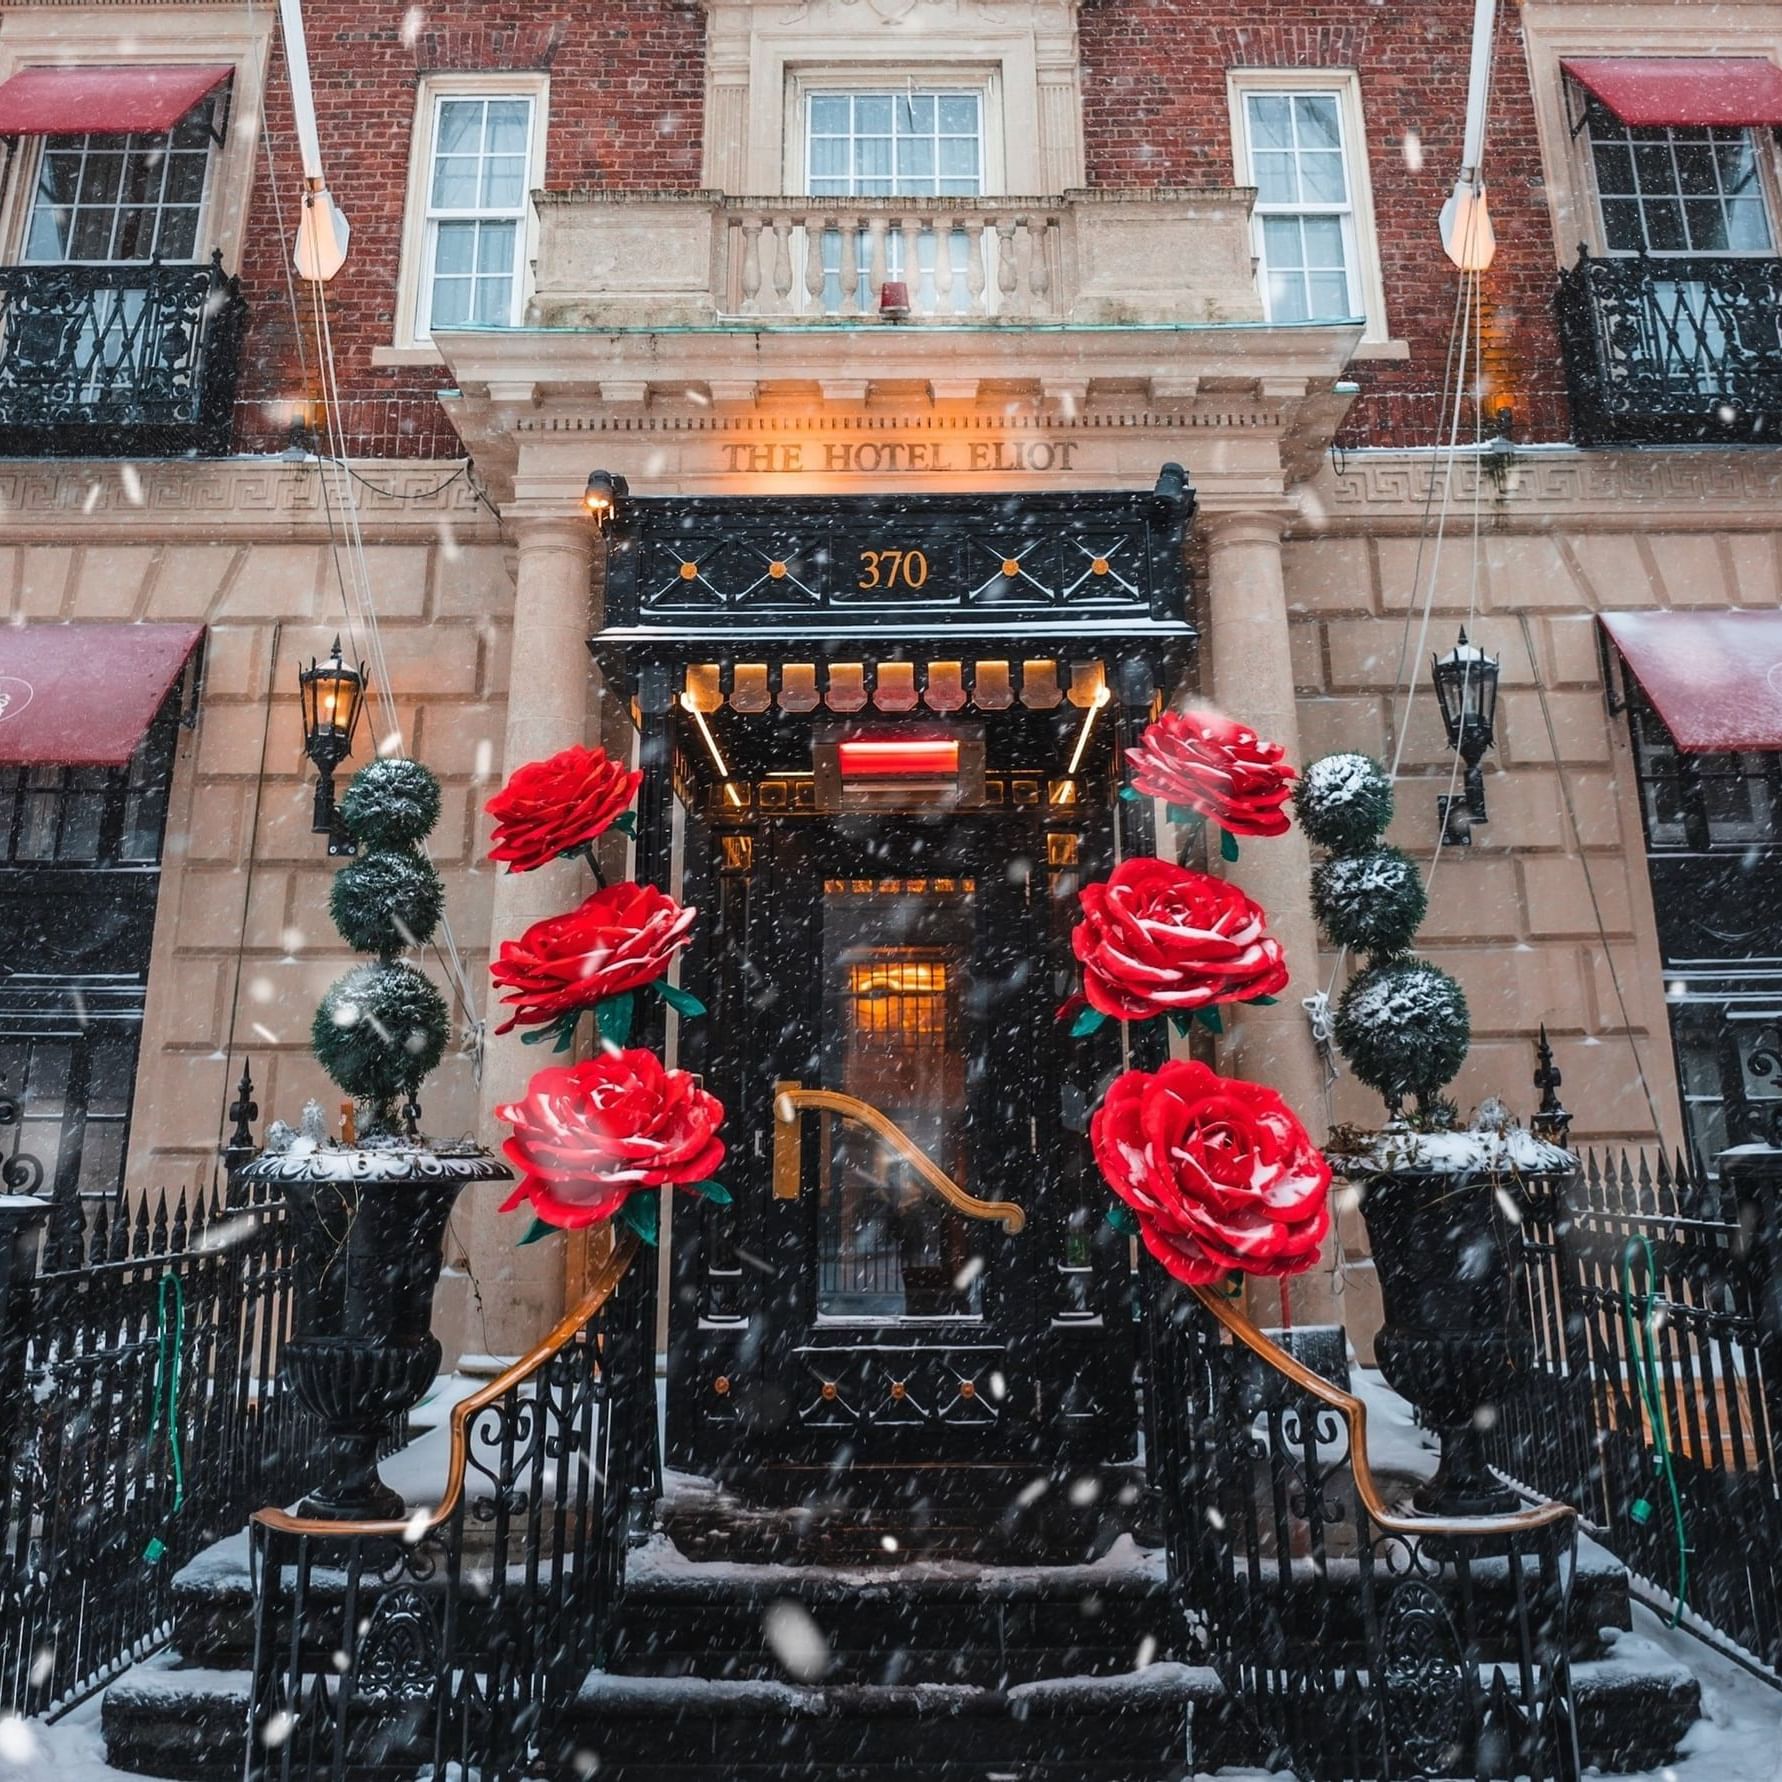 Valentine's red roses decors at the entrance of The Eliot Hotel